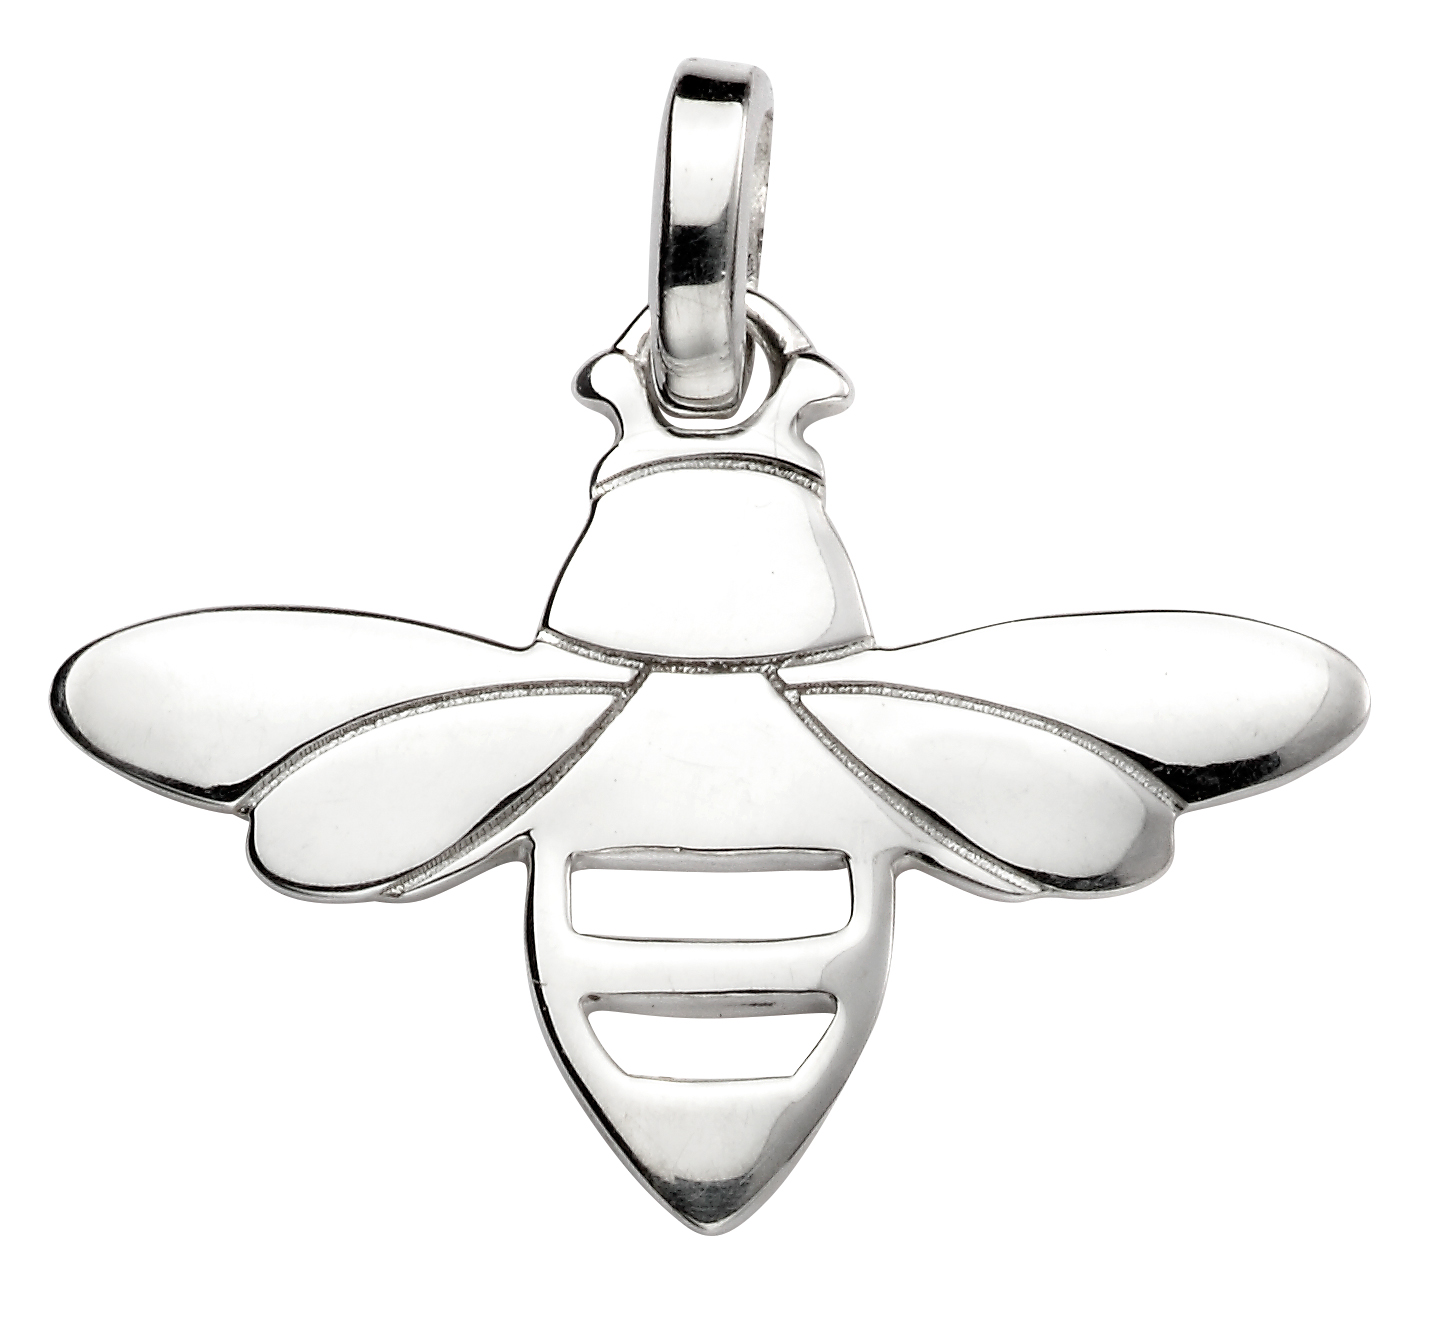 Bee Necklace Sterling Silver